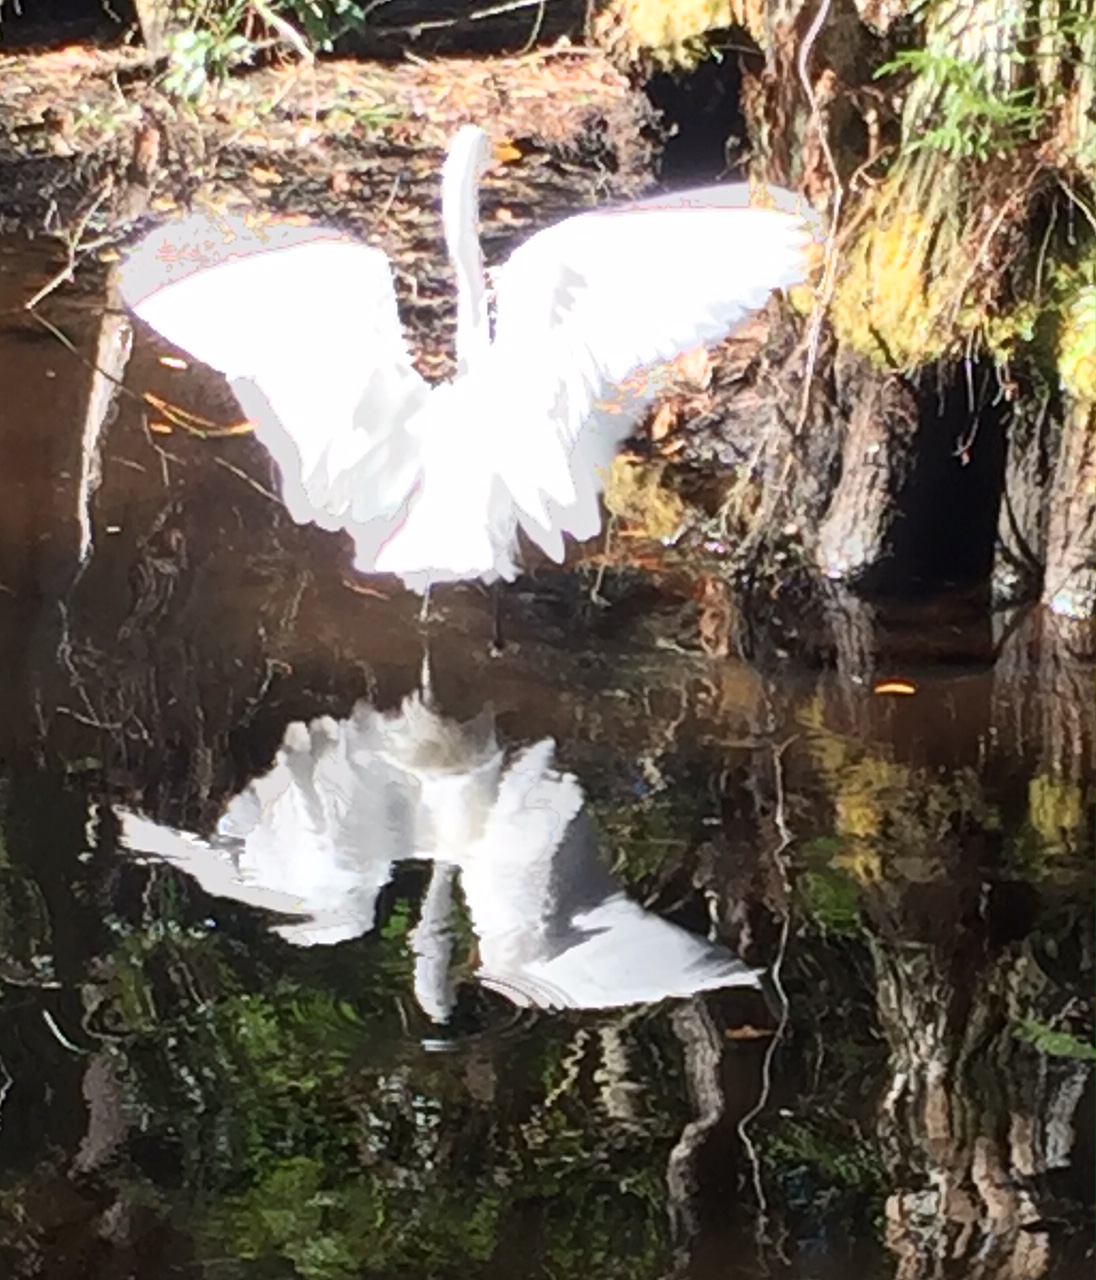 A swan wings spread with it's reflection on the still water of a pond.